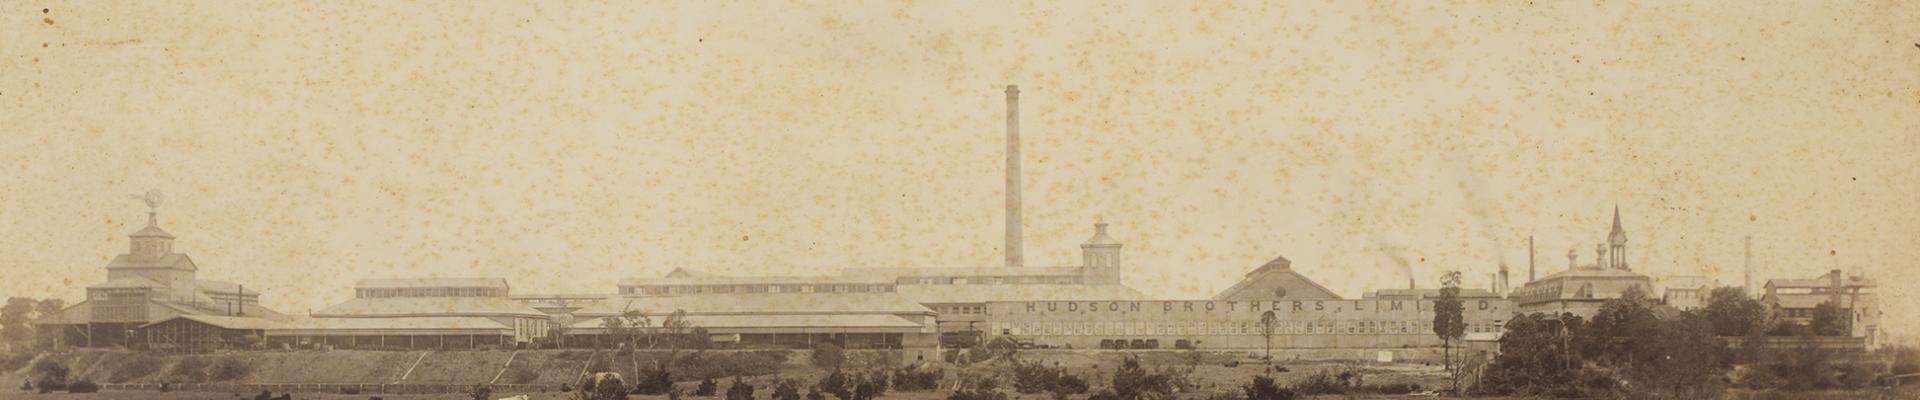 Hudson Brothers Engineering Factory, ca. 1885, Clyde, Sydney